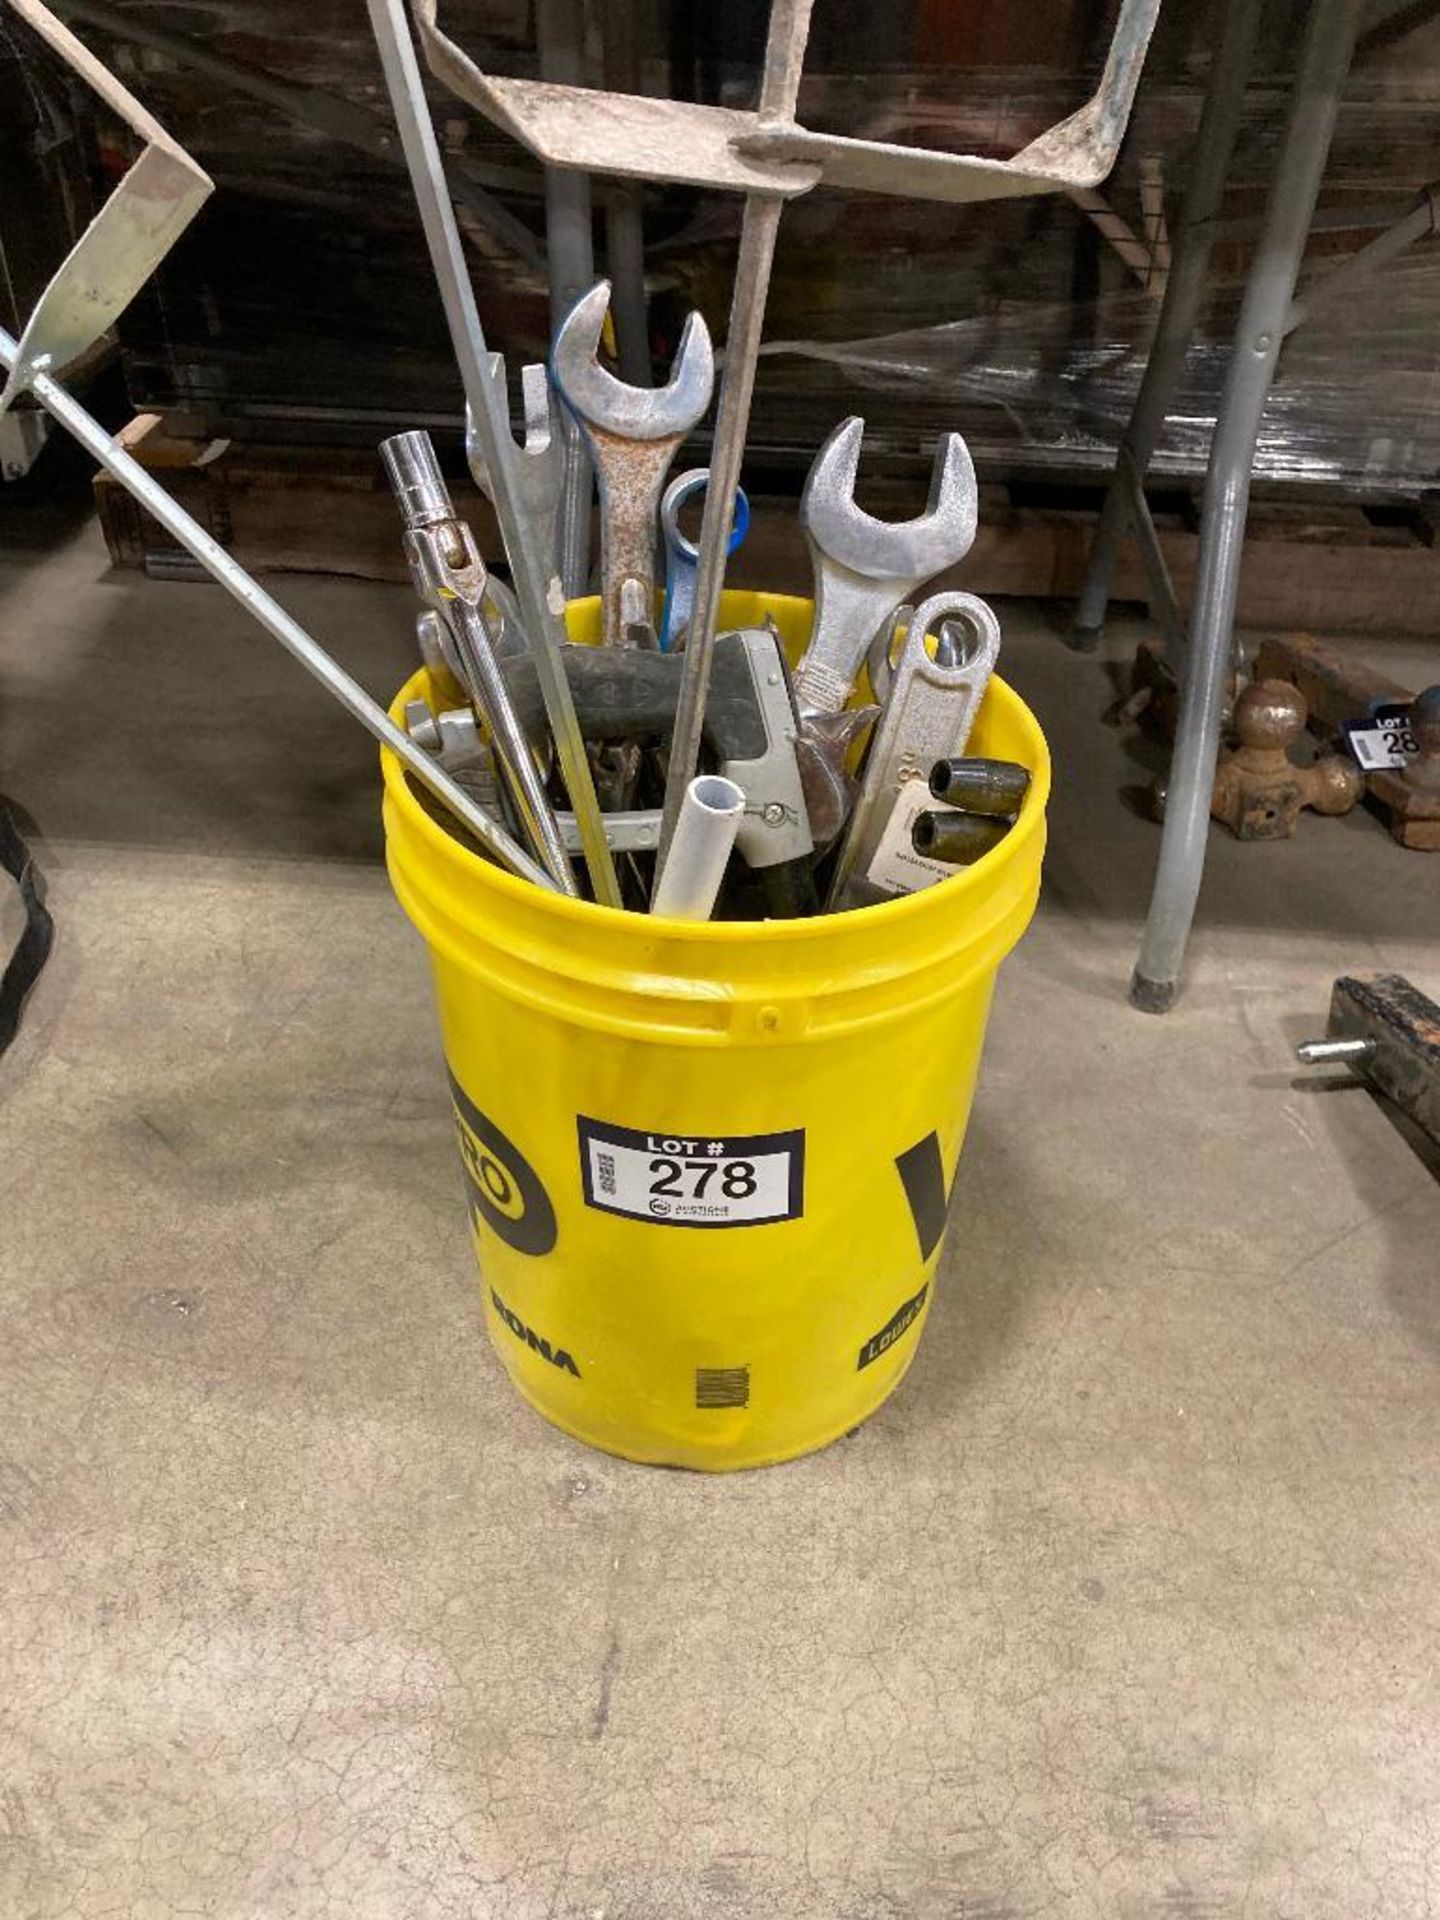 Lot of Asst. Wrenches, Sockets, Mixer Attachments, Hacksaw, etc.